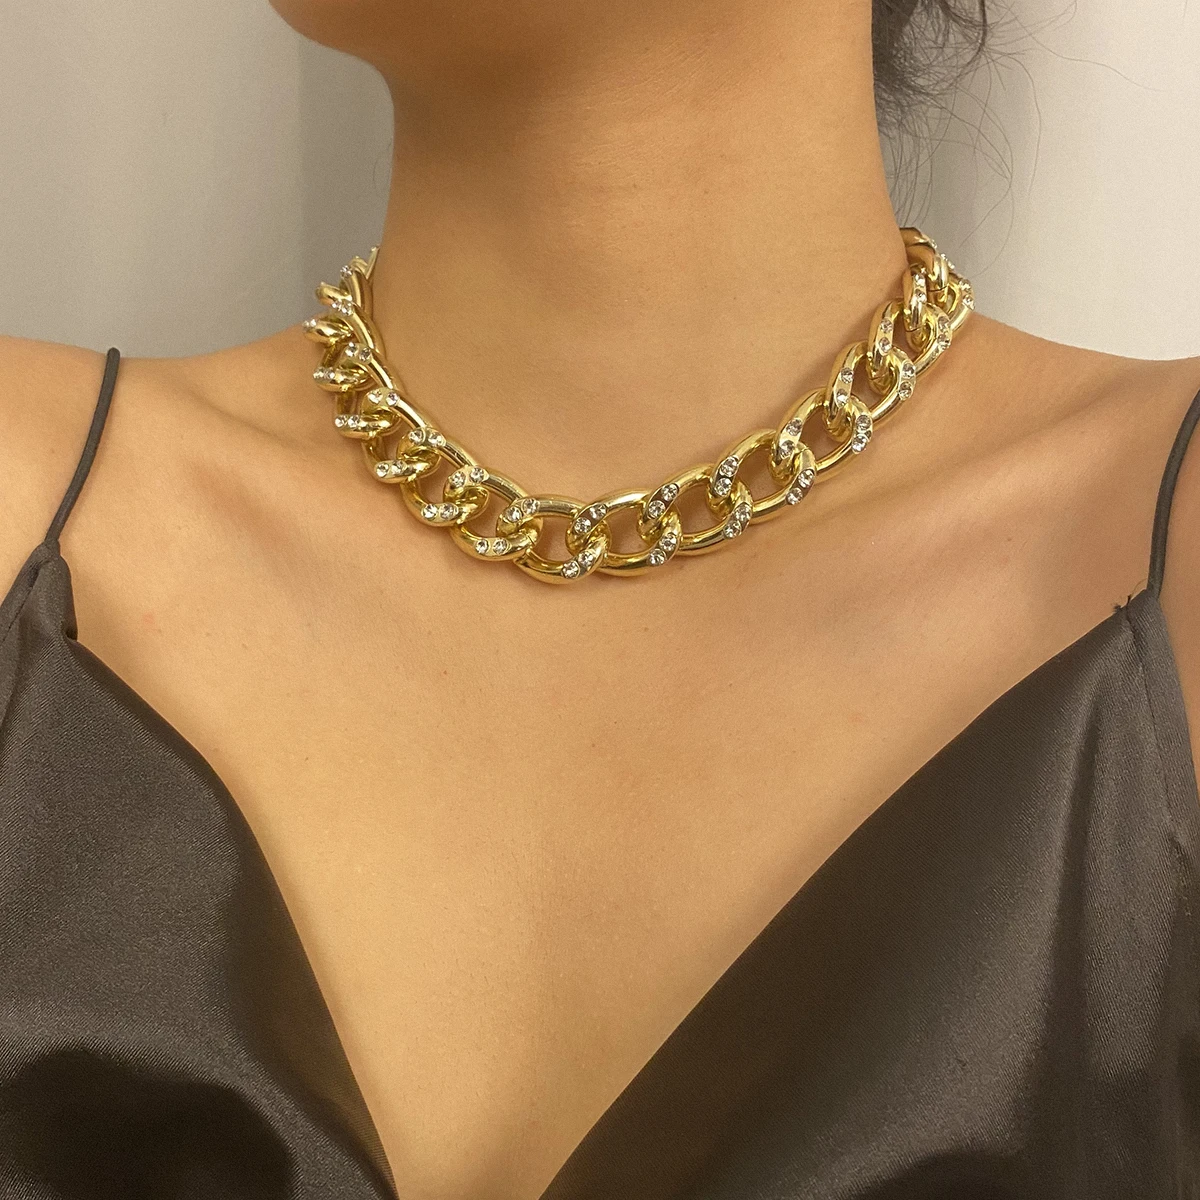 

SHIXINH Heavy Curb Chunky Necklaces Zircon Choker Rhinestone/Crystal Gold Cuban Link Chain Statement Necklace for Women Jewelry